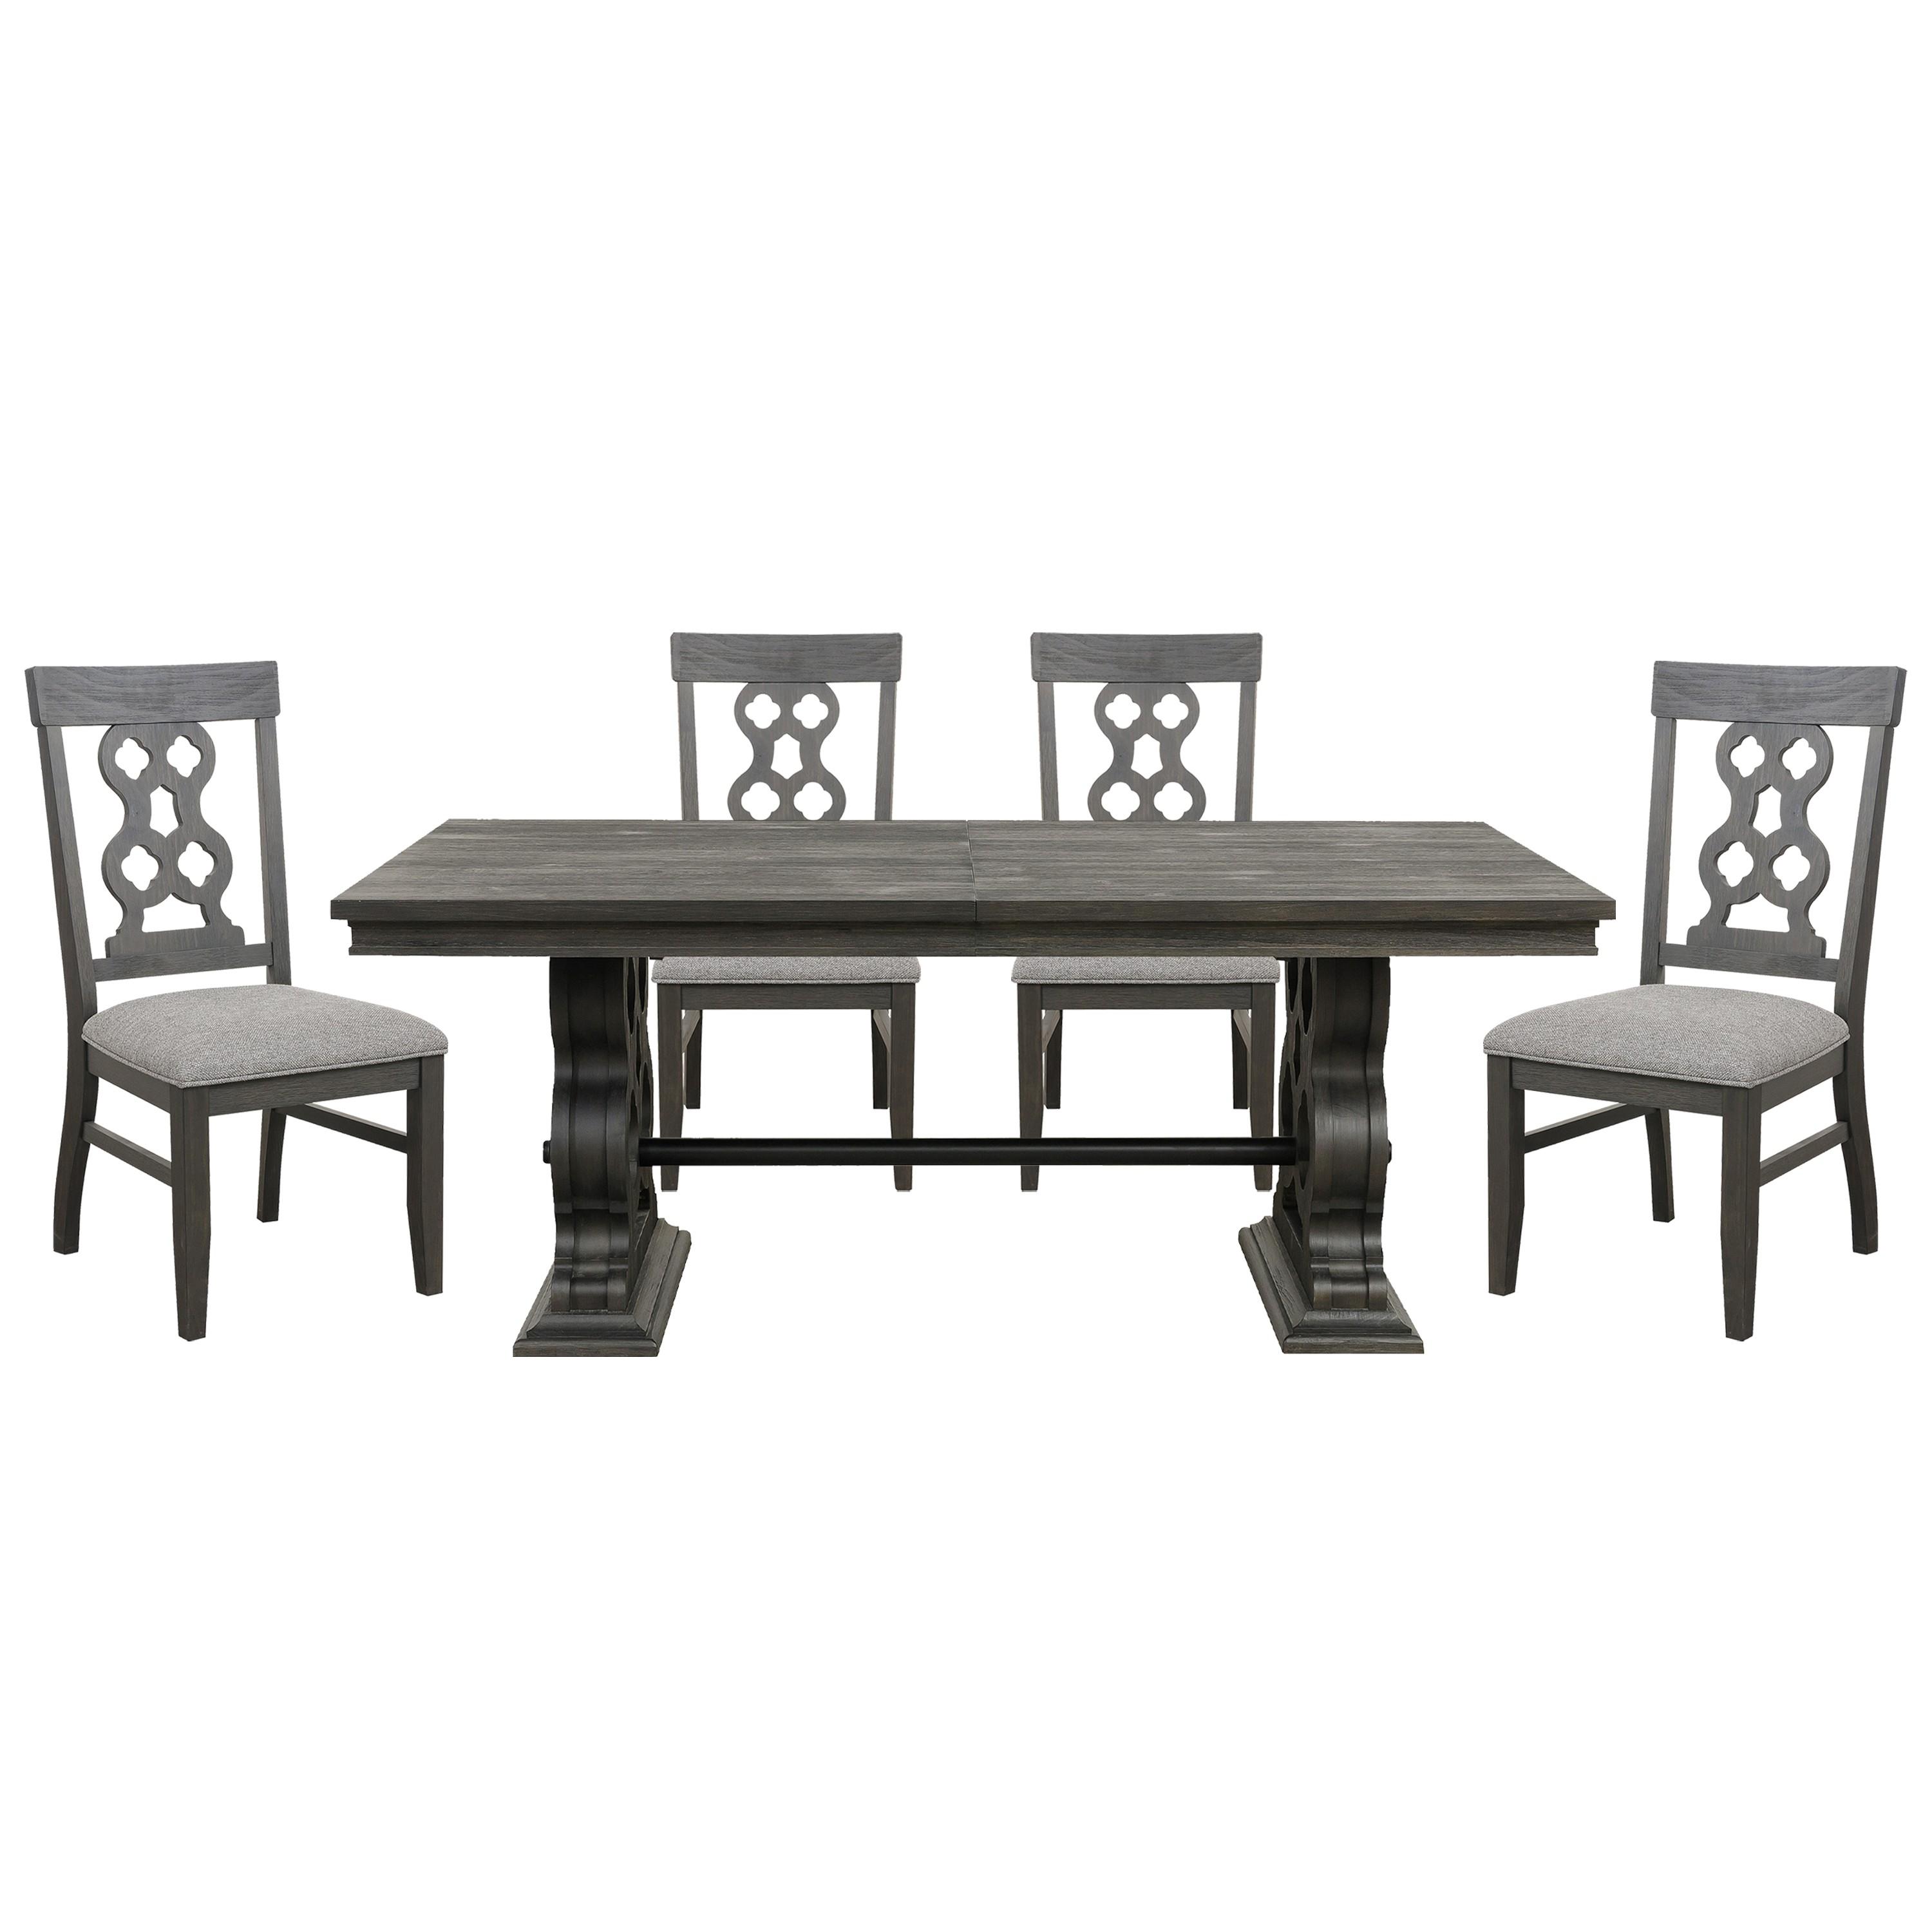 Traditional Dining Room Set 5559N-96*5PC Arasina 5559N-96*5PC in Pewter Polyester